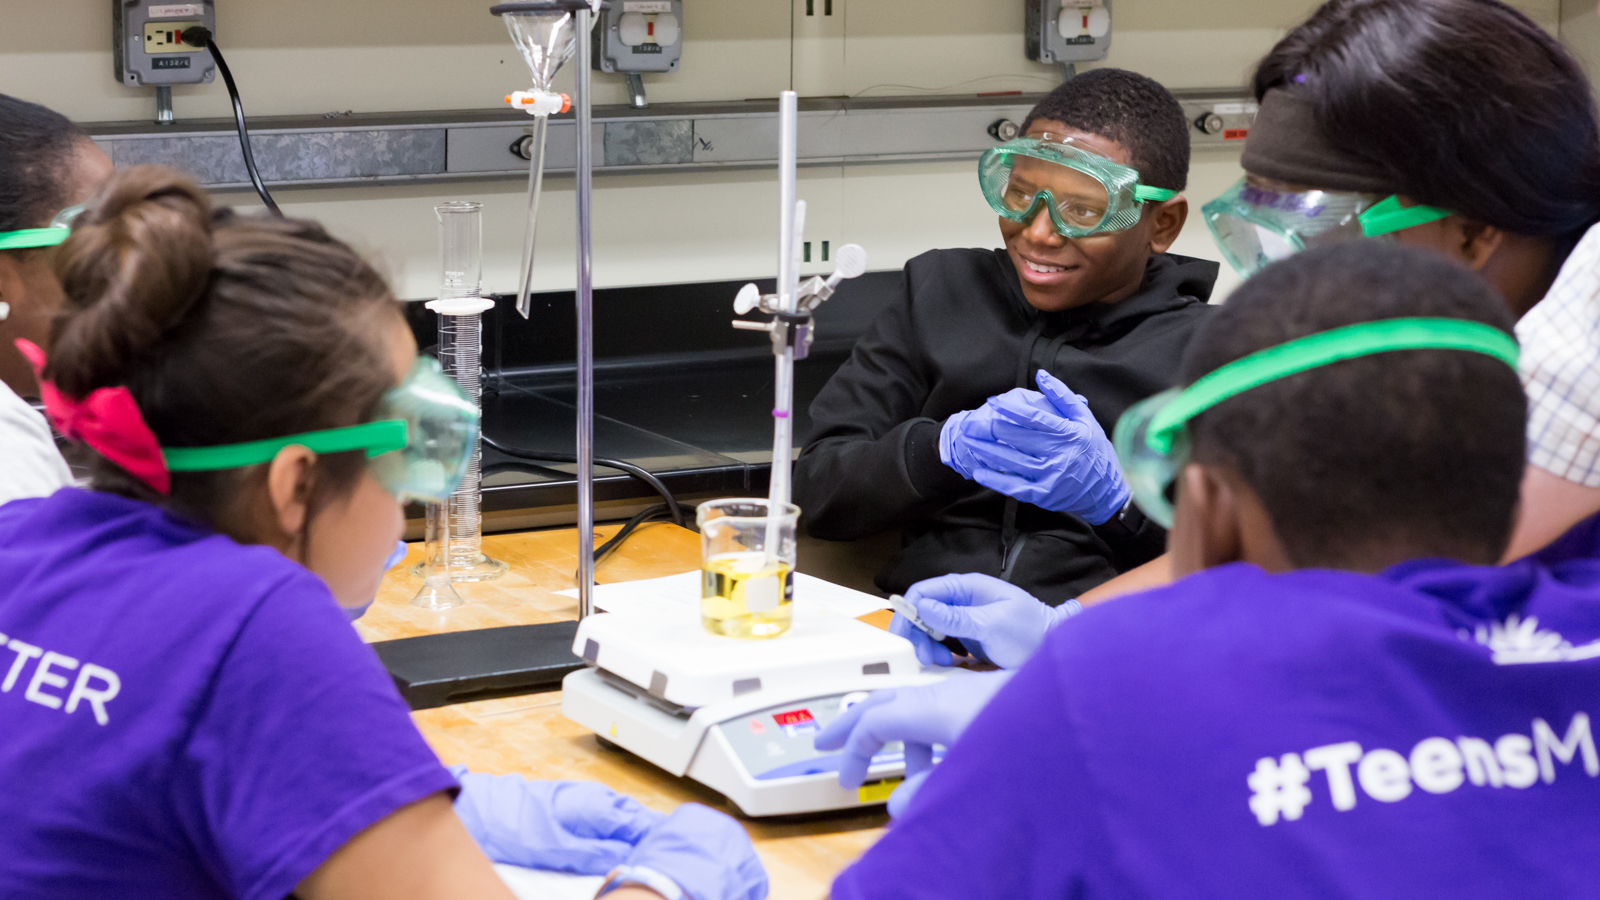 Chicago high school students made biofuel at Argonne as part of a summer partnership between the laboratory and the University of Chicago.